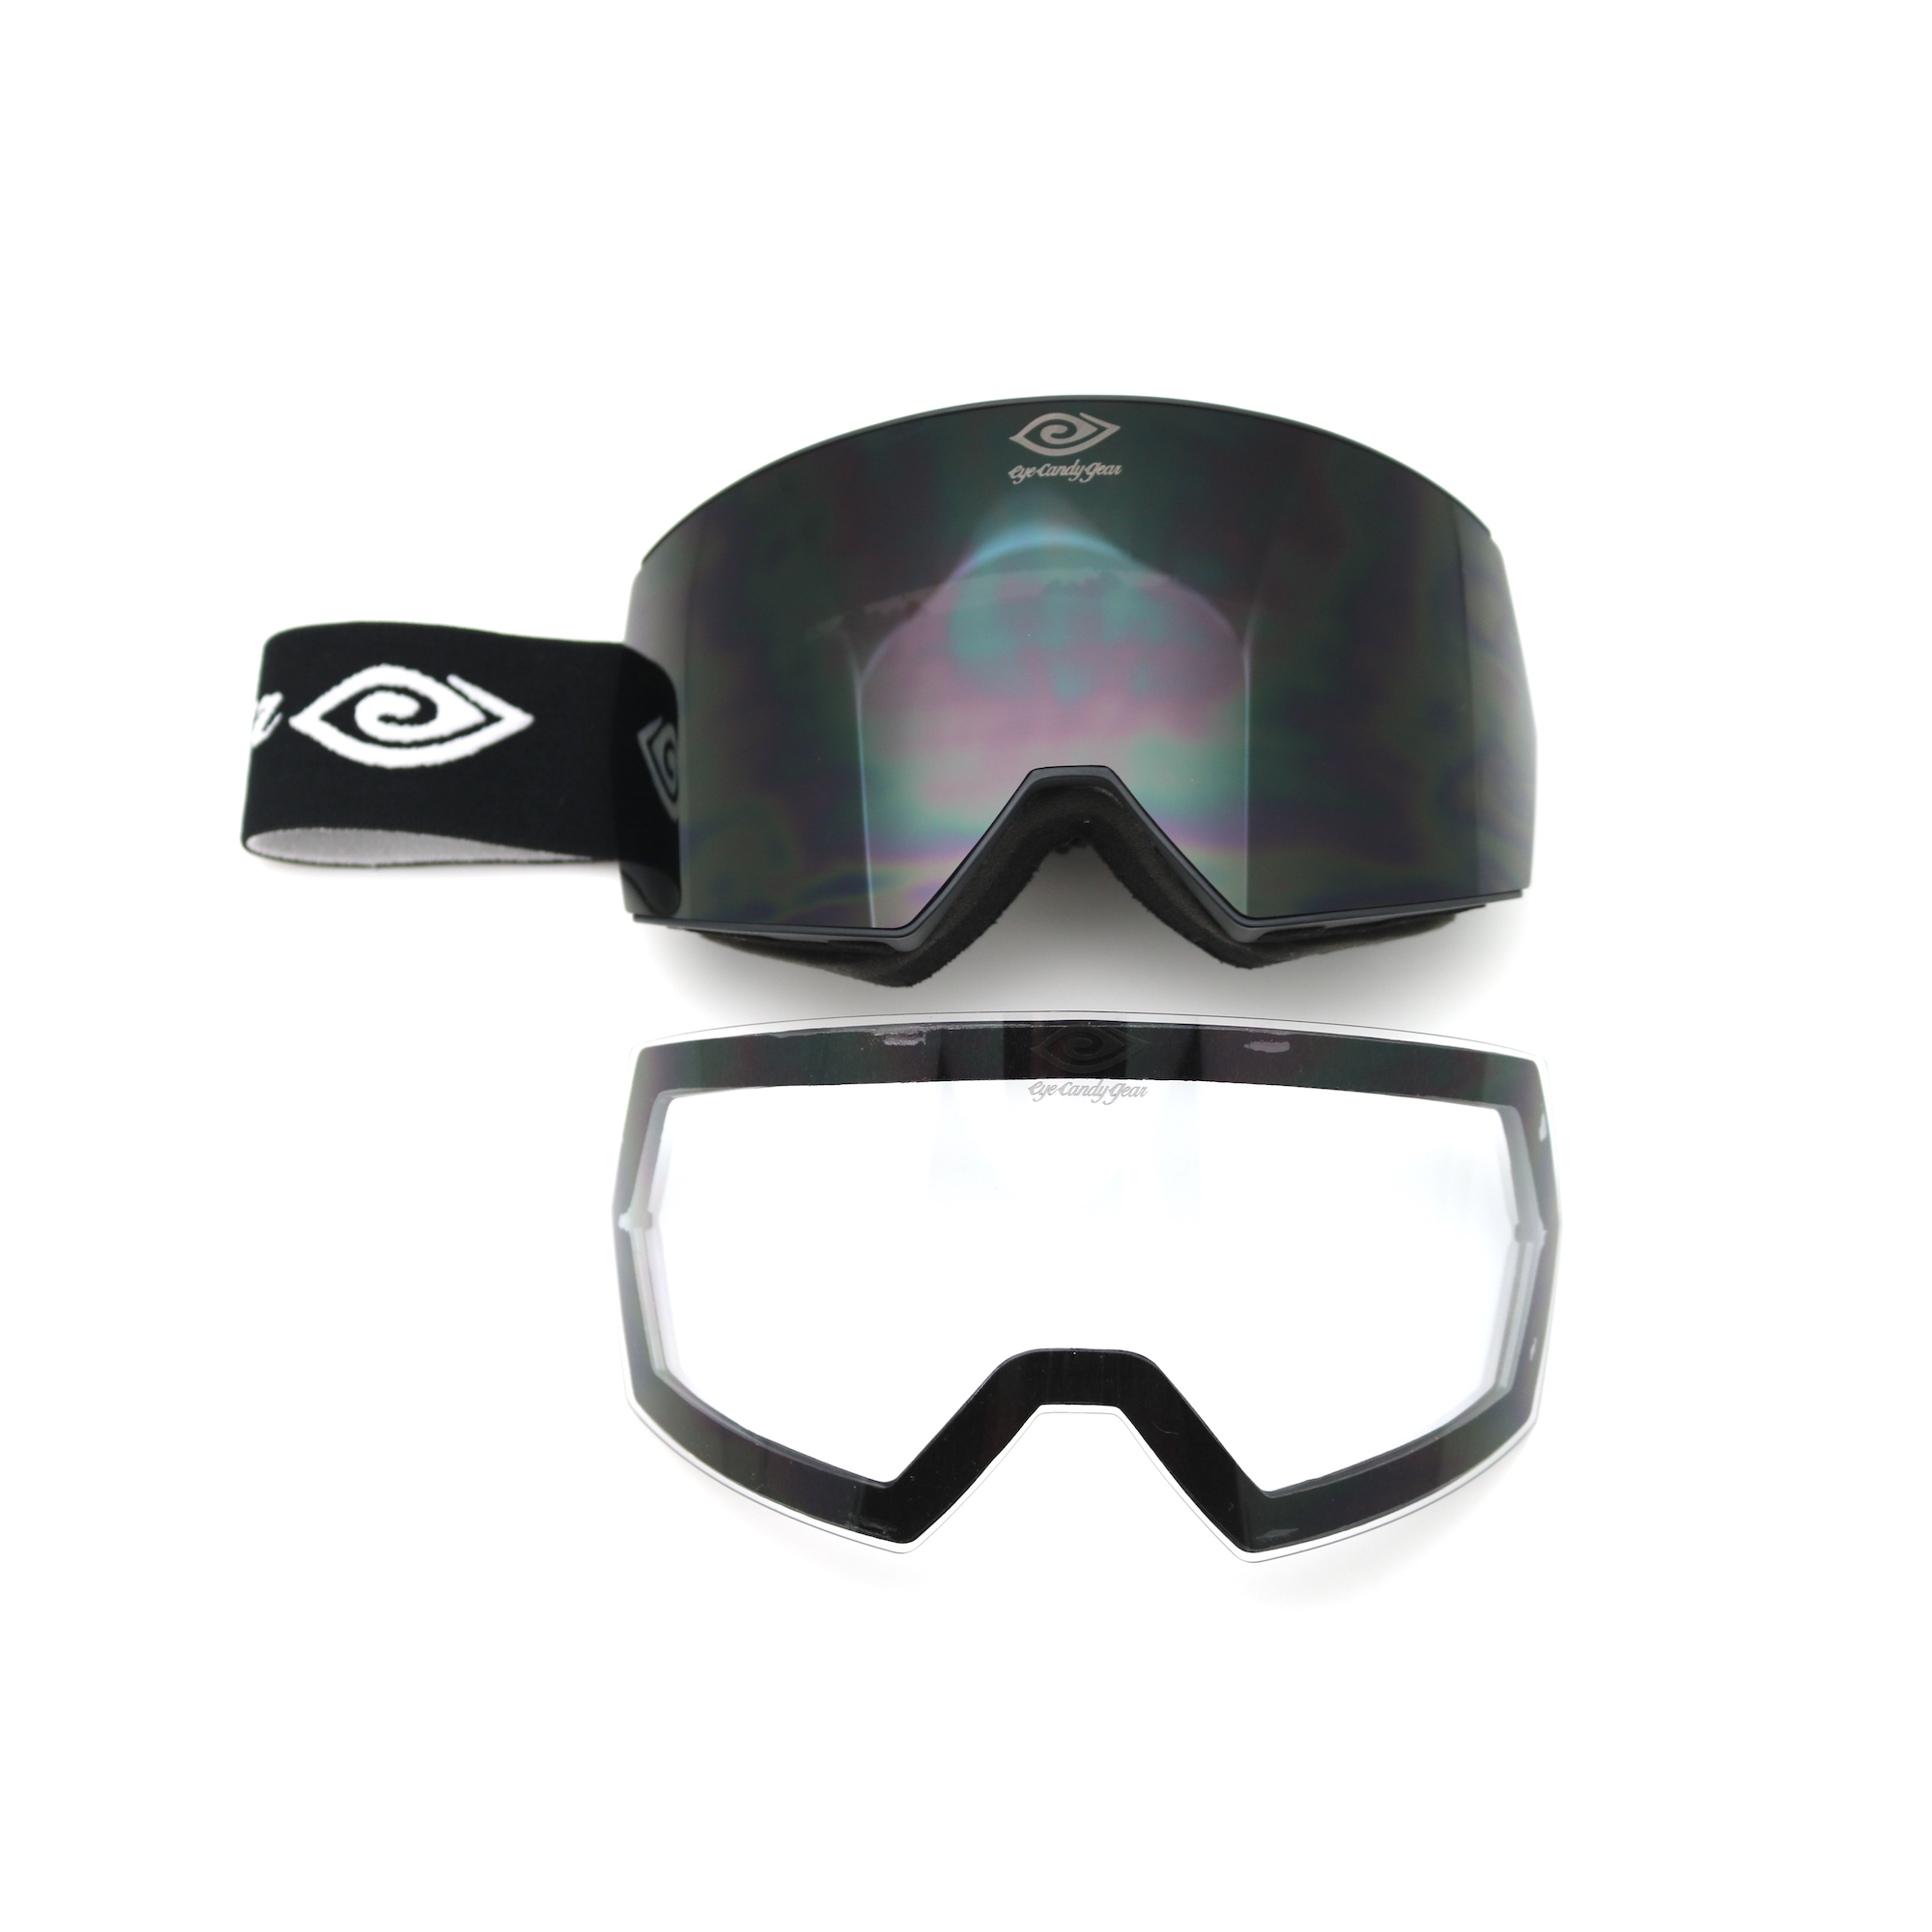 Double Black - Magnetized - Eye (Interchangeable Candy – Lenses) Gear Goggles Snow